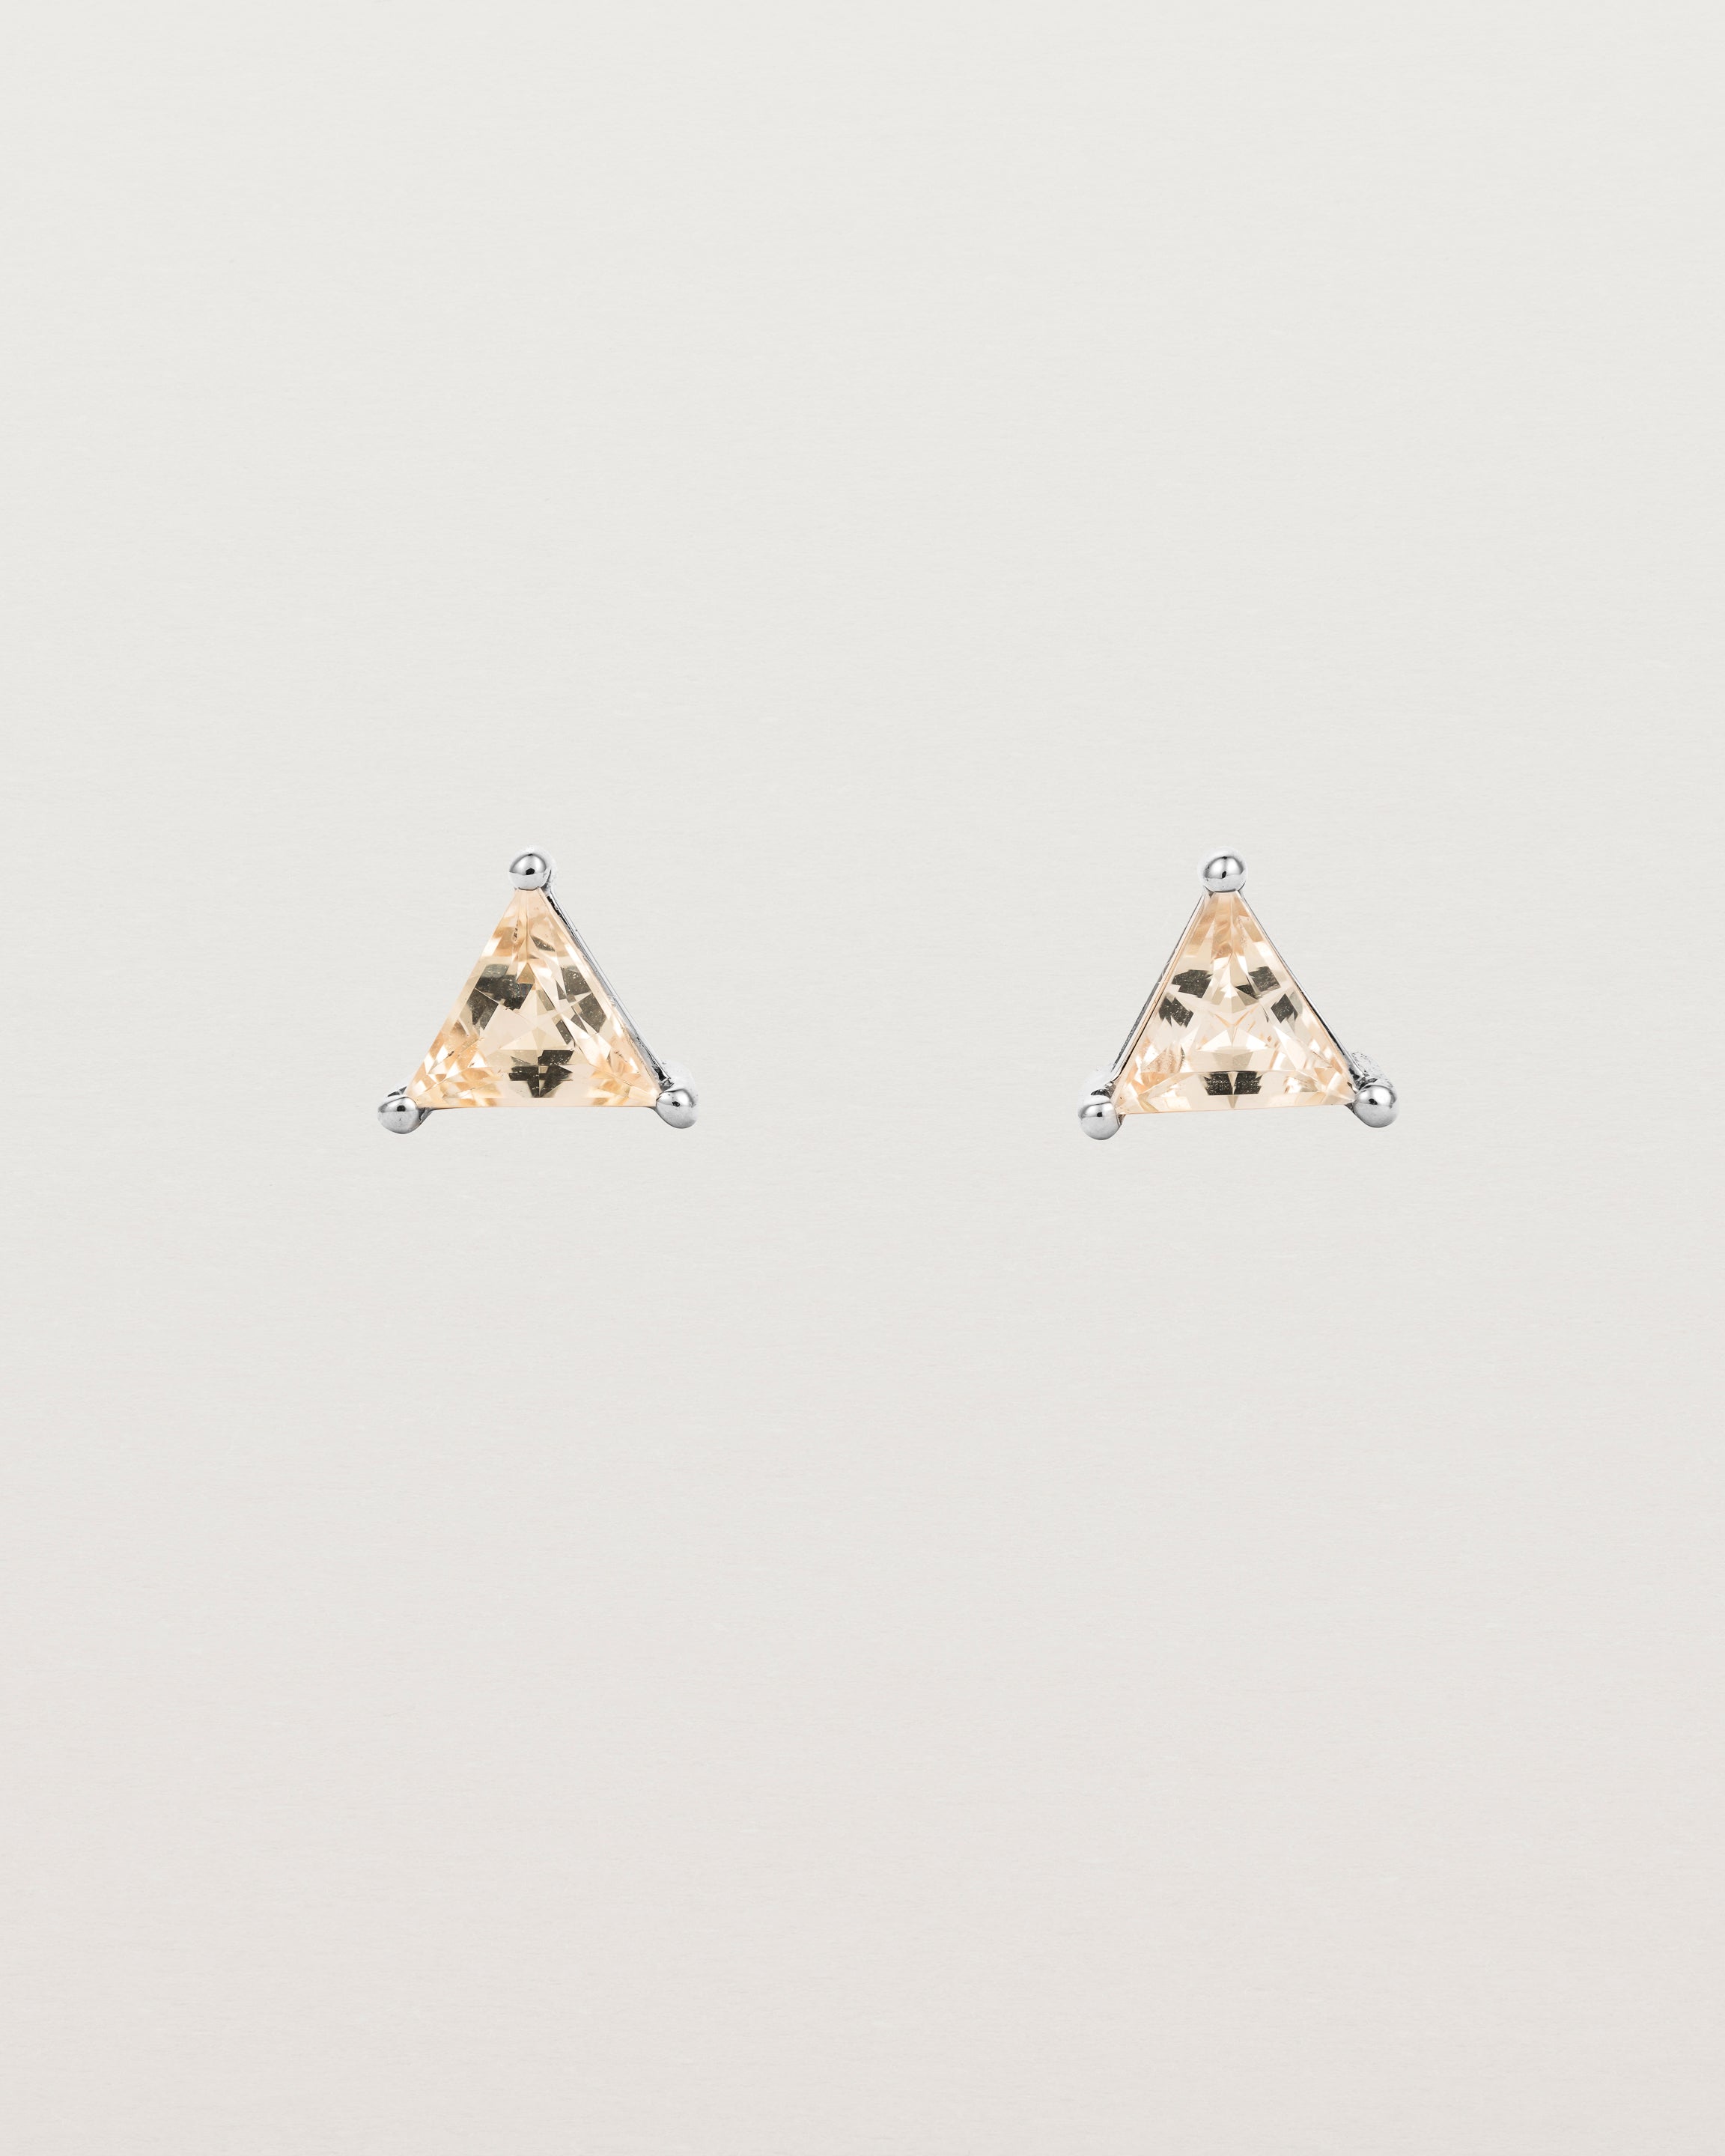 A pair of sterling silver studs featuring a triangle shaped rutilated quartz